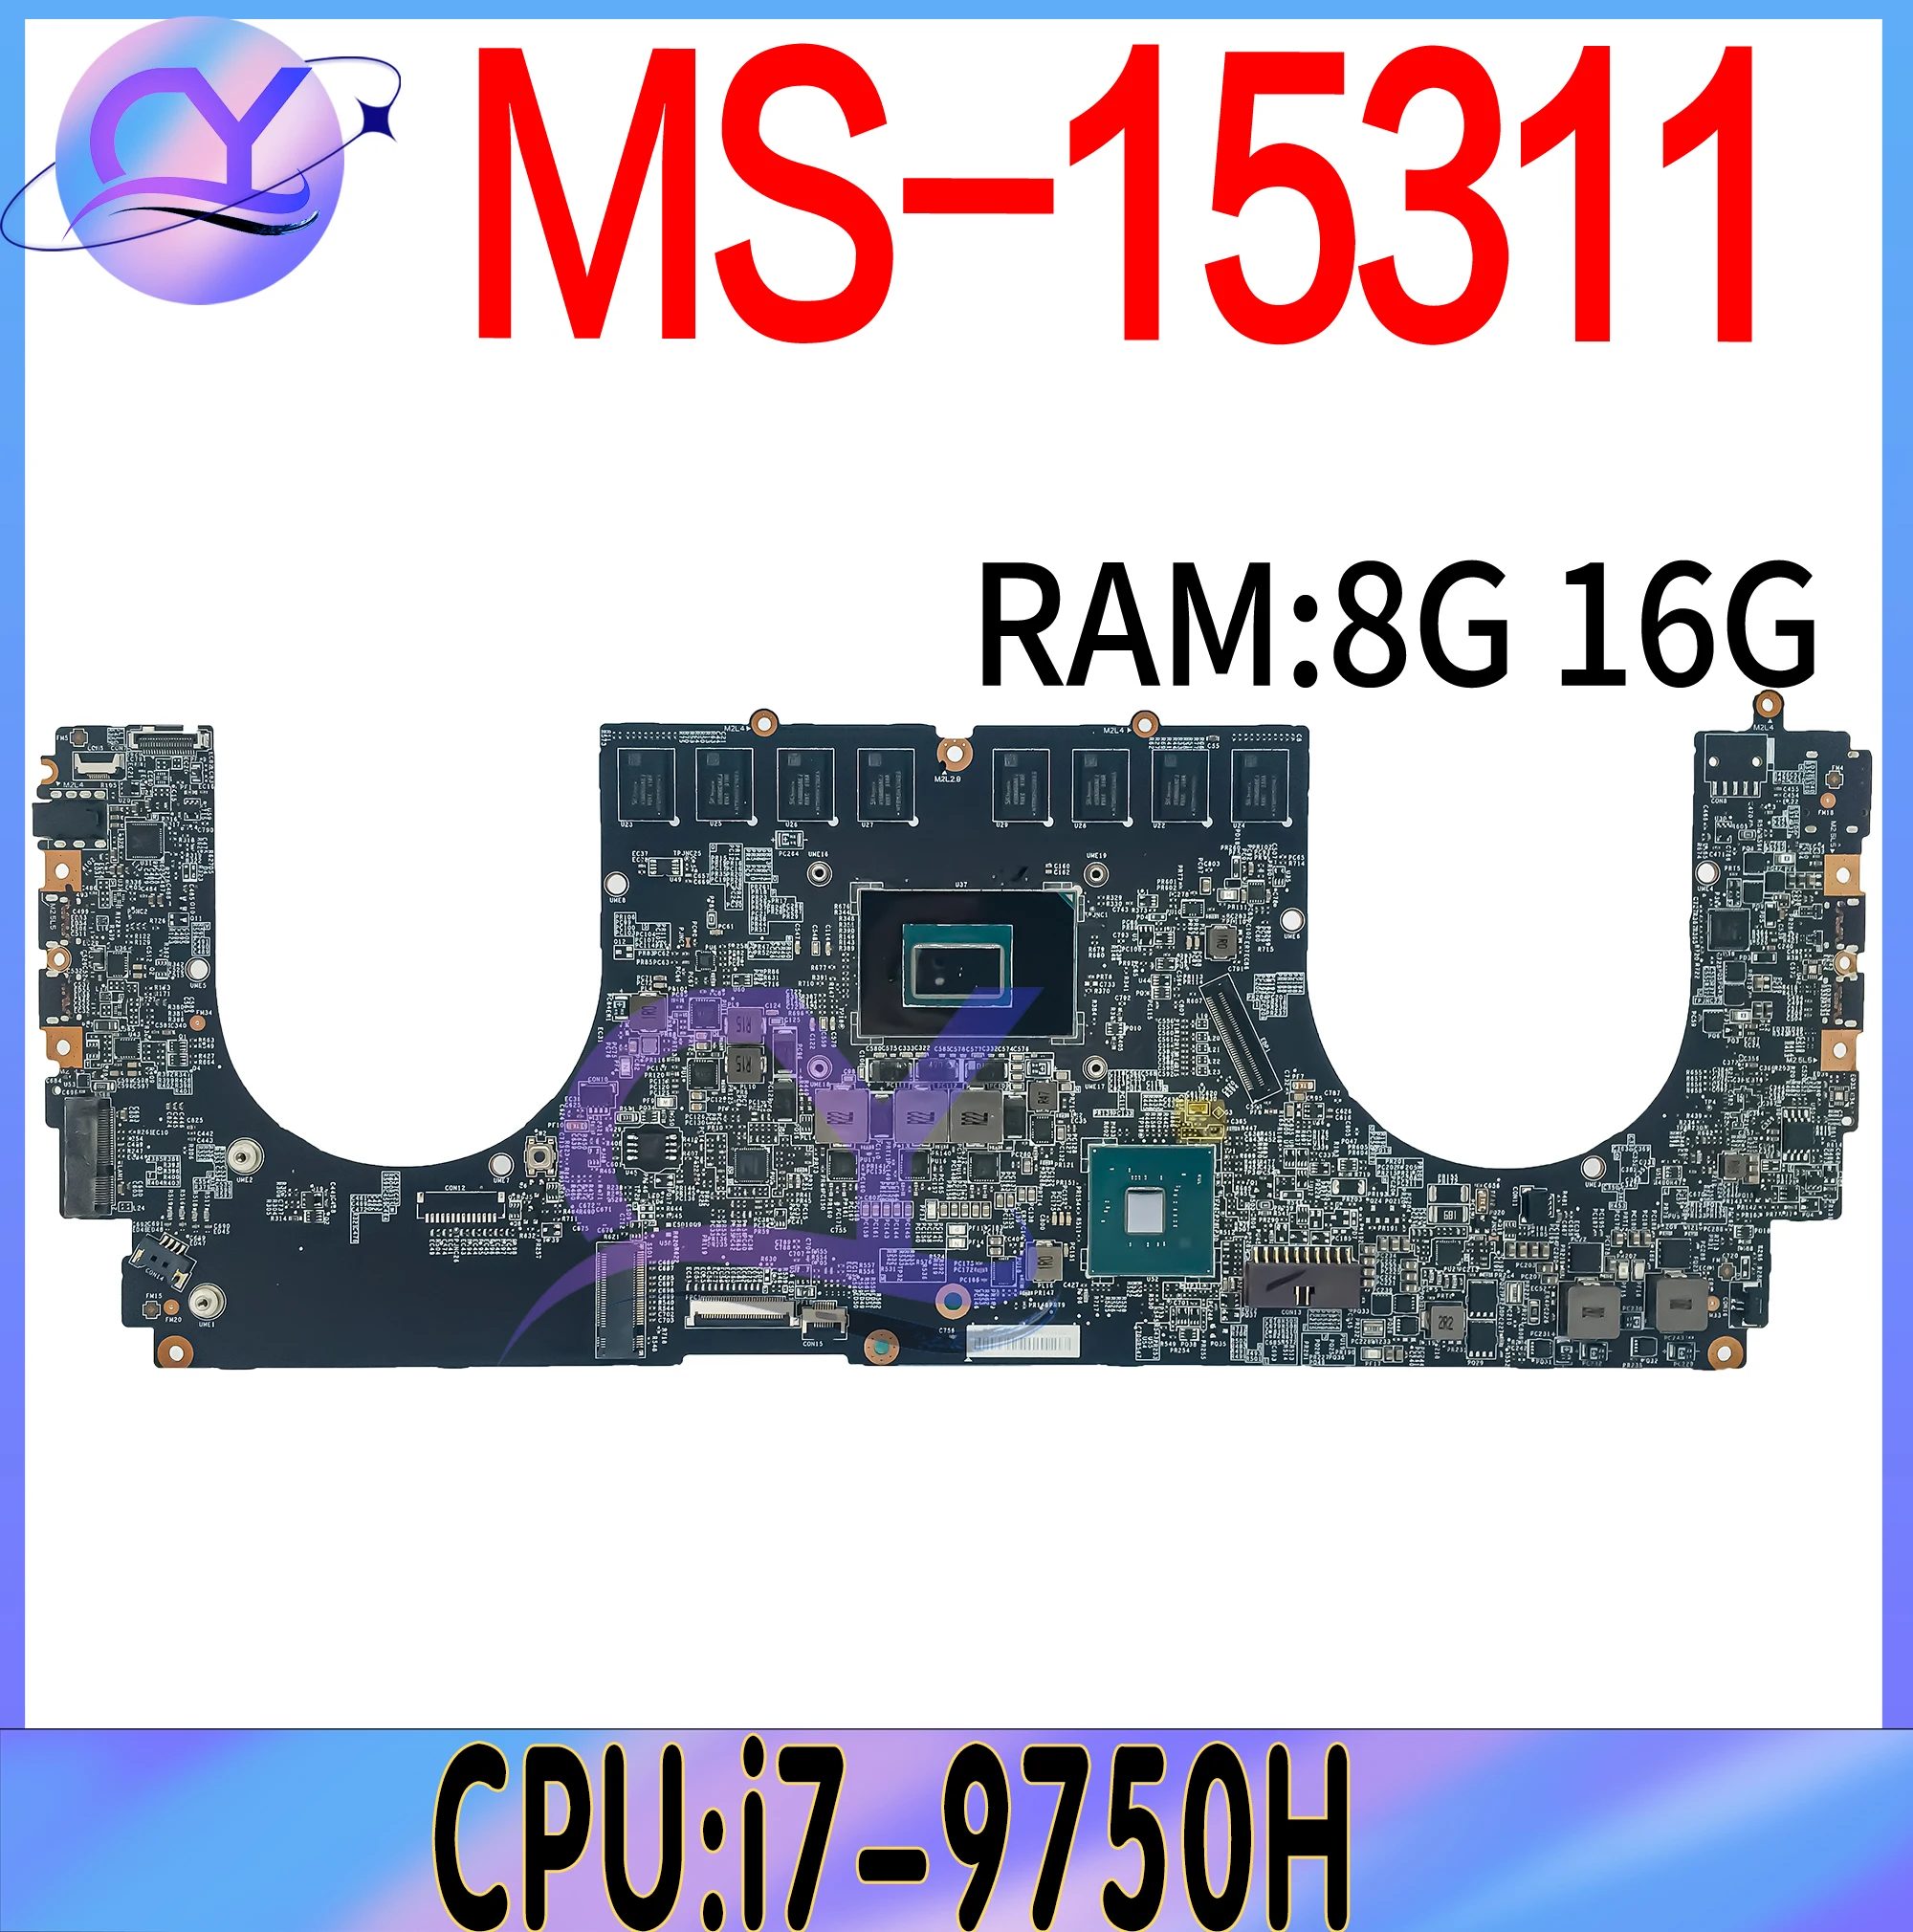 

MS-15311 Laptop Motherboard For MSI MS-1531 Odin-I MS-15311N1 Mainboard With i7-9750H 16G OR 8G-RAM 100% Testd Fast Shipping